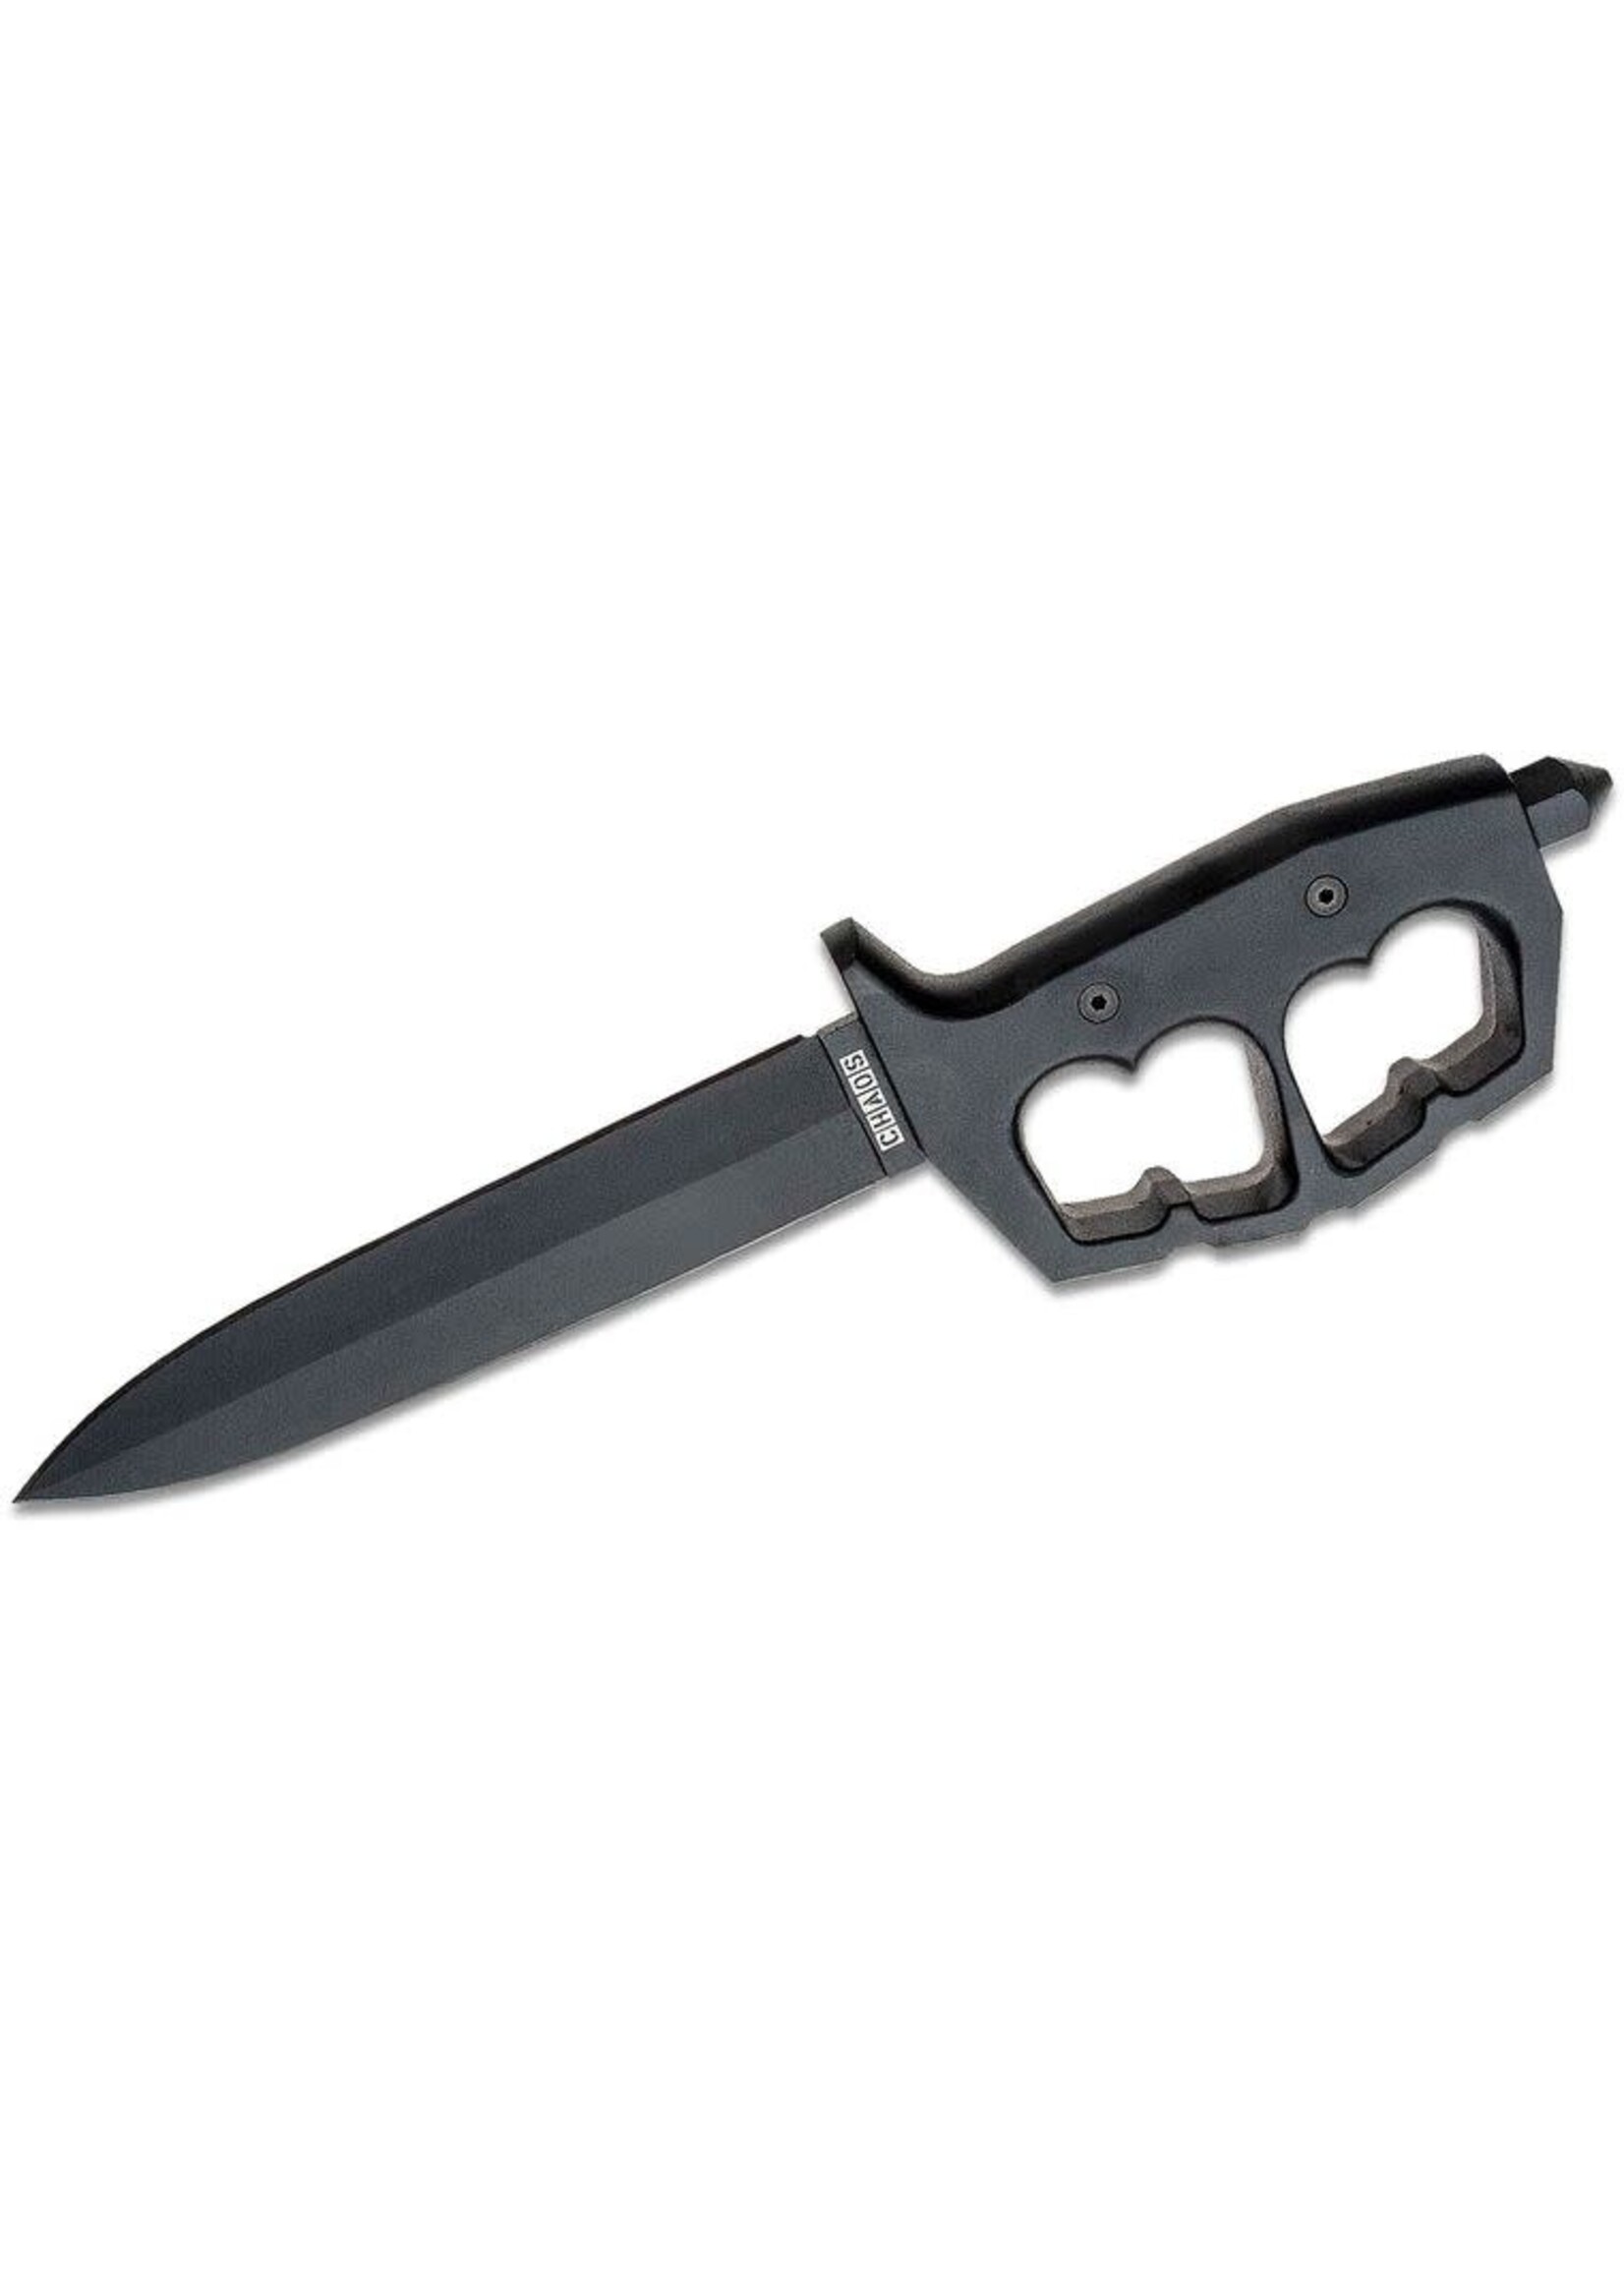 COLD STEEL CHAOS DOUBLE EDGE